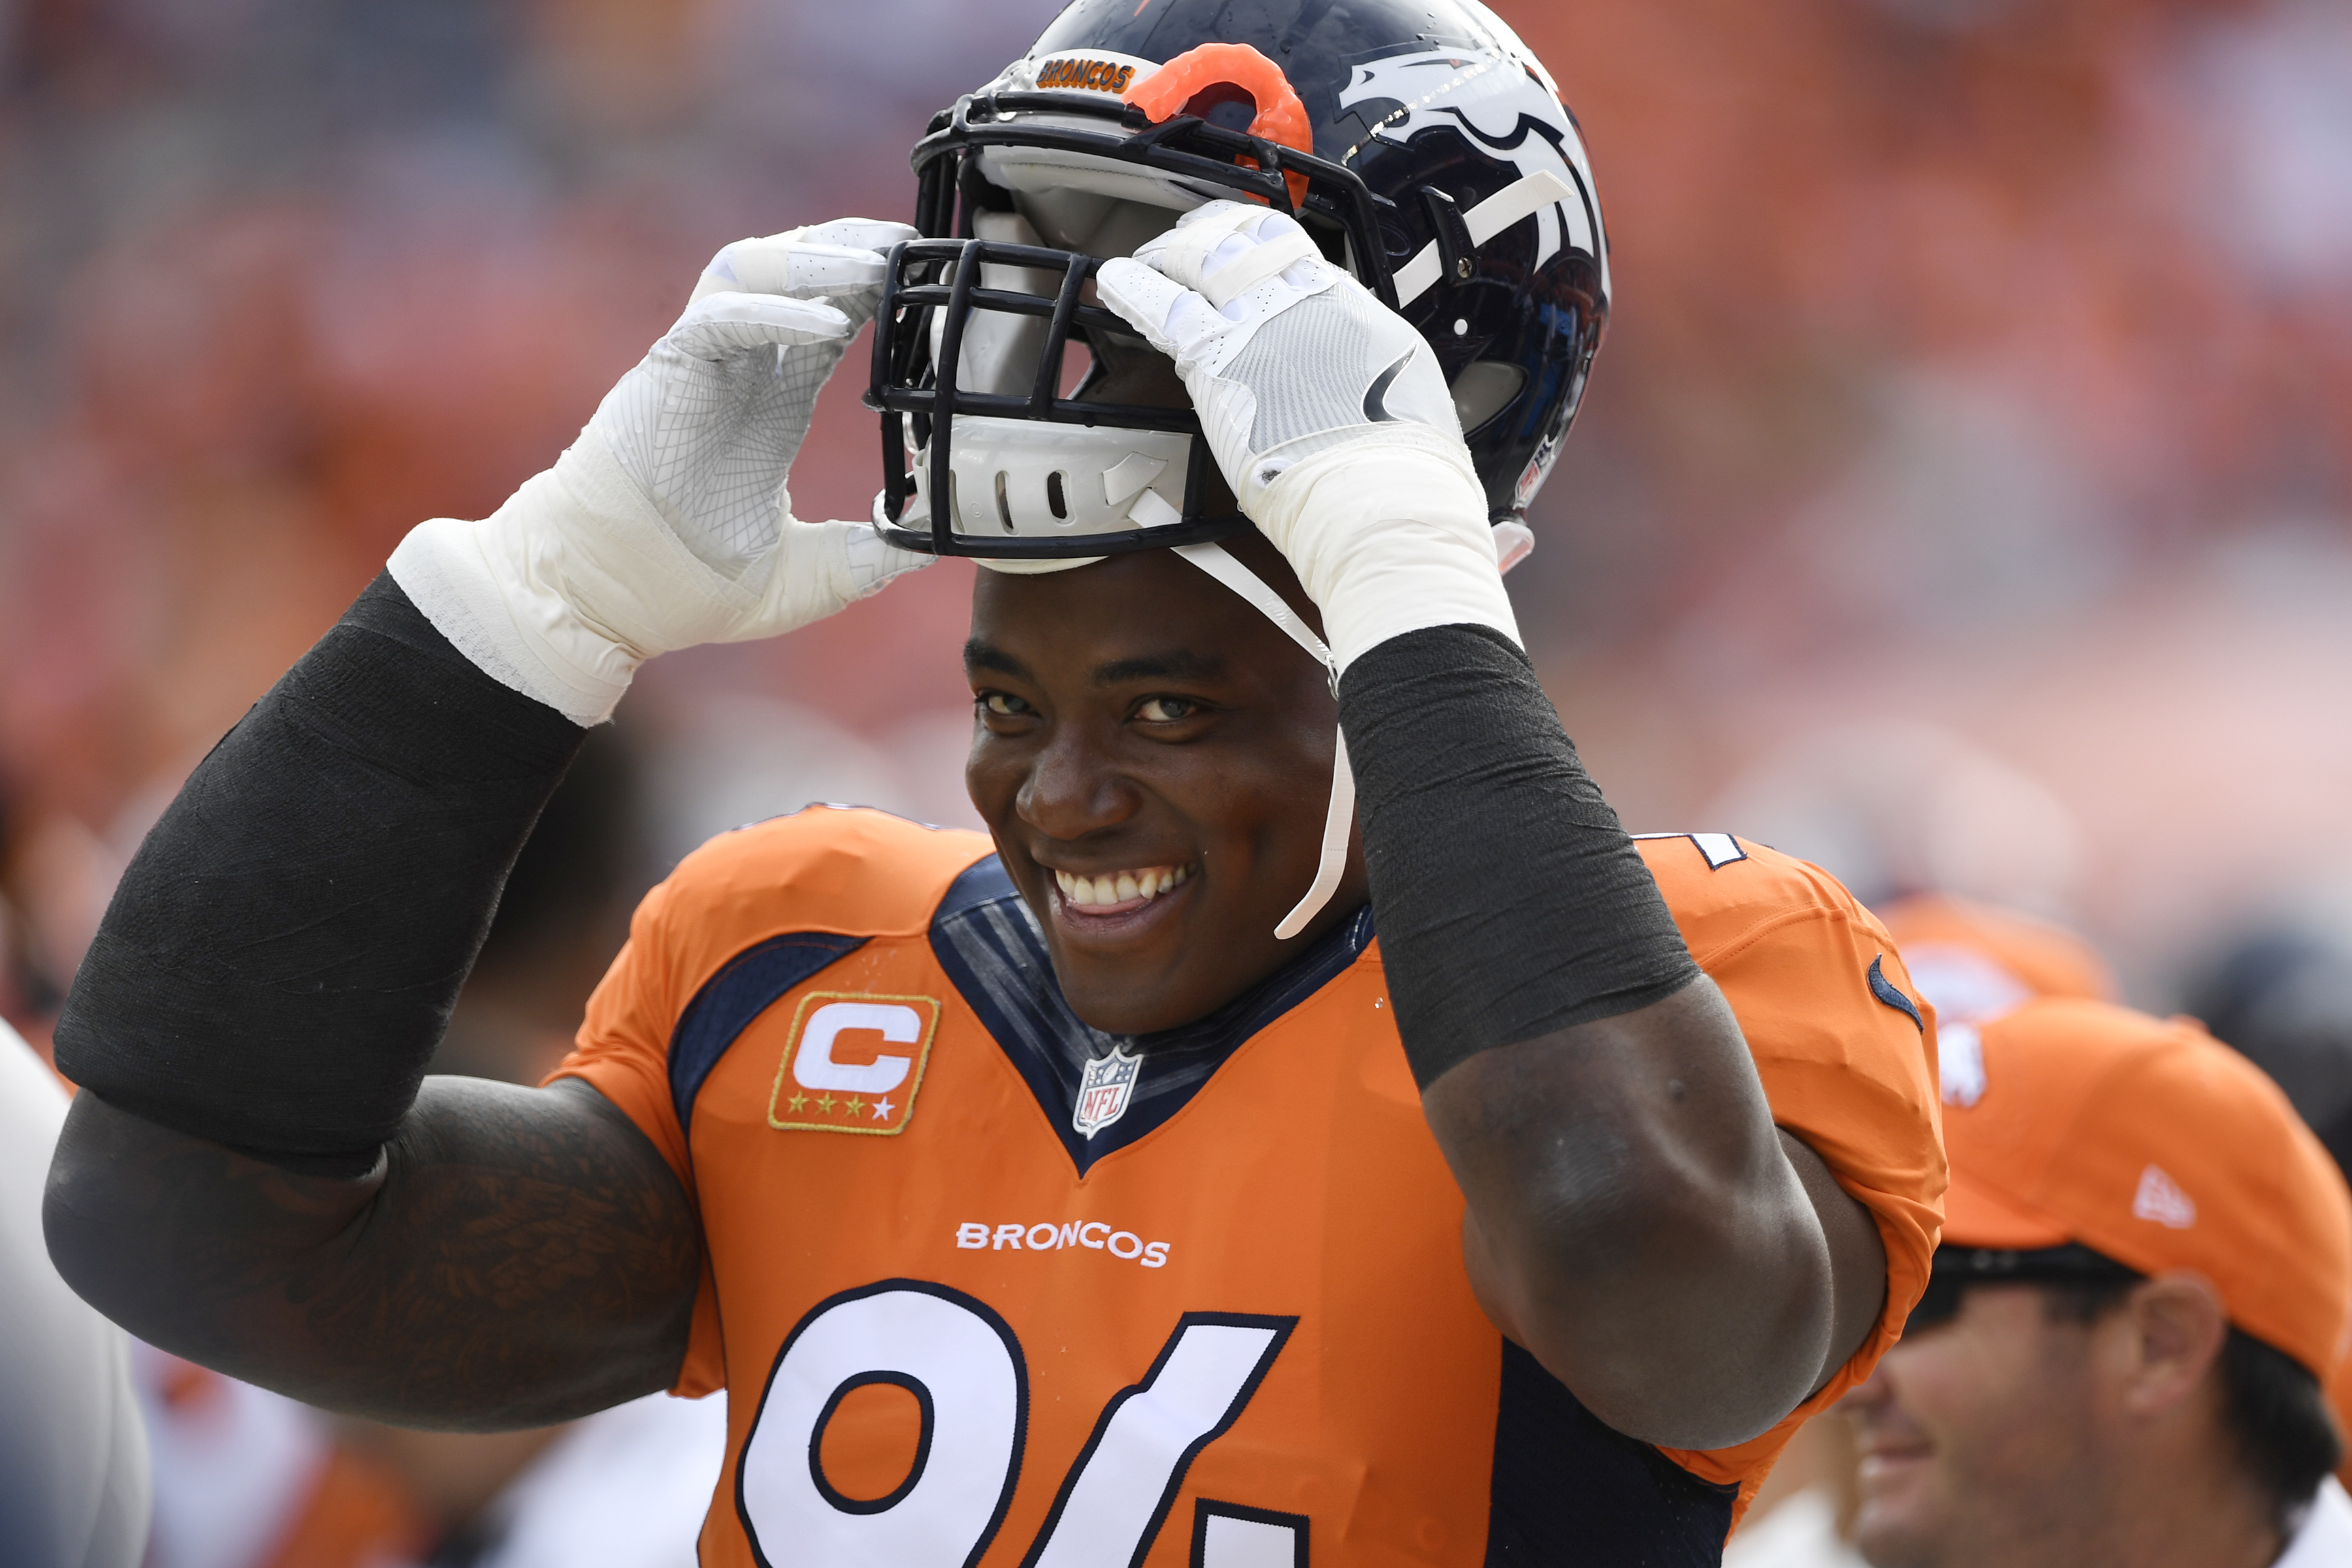 NFL players respond to DeMarcus Ware's retirement